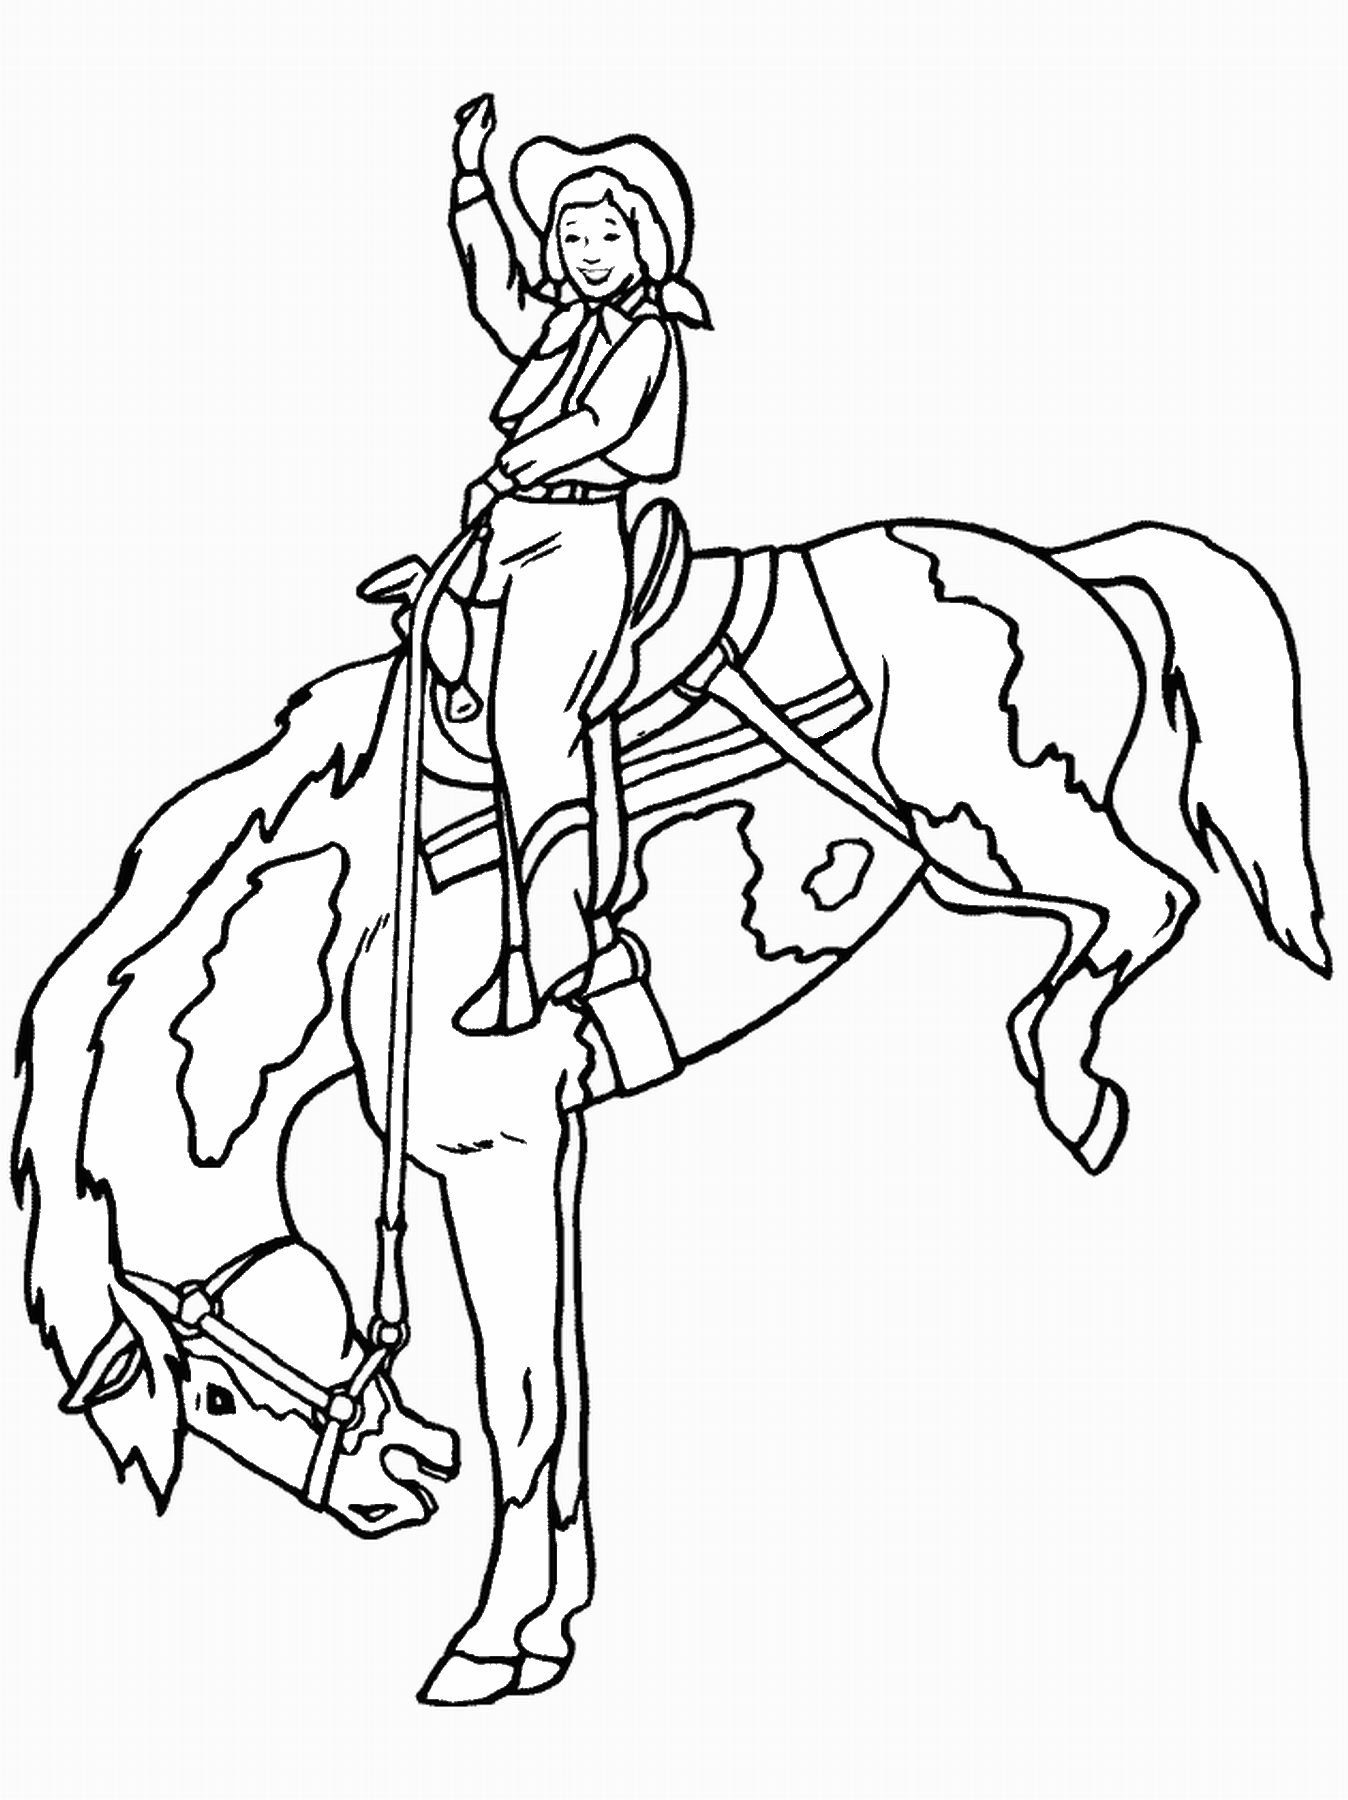 Cowboy Coloring Pages for boys cowboy_39 Printable 2020 0191 Coloring4free